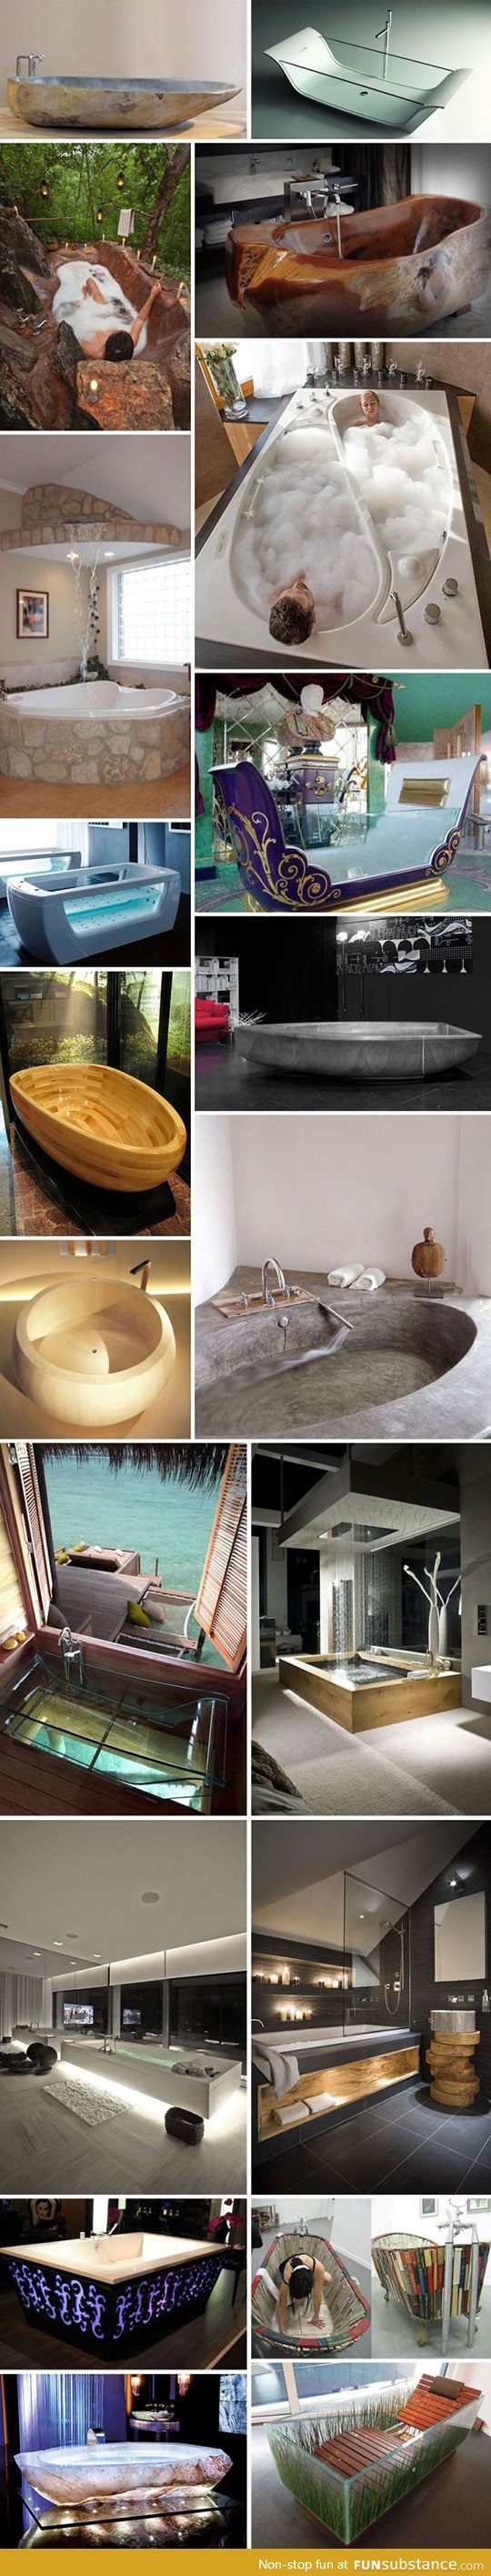 Awesome bathtubs that make you want to jump in